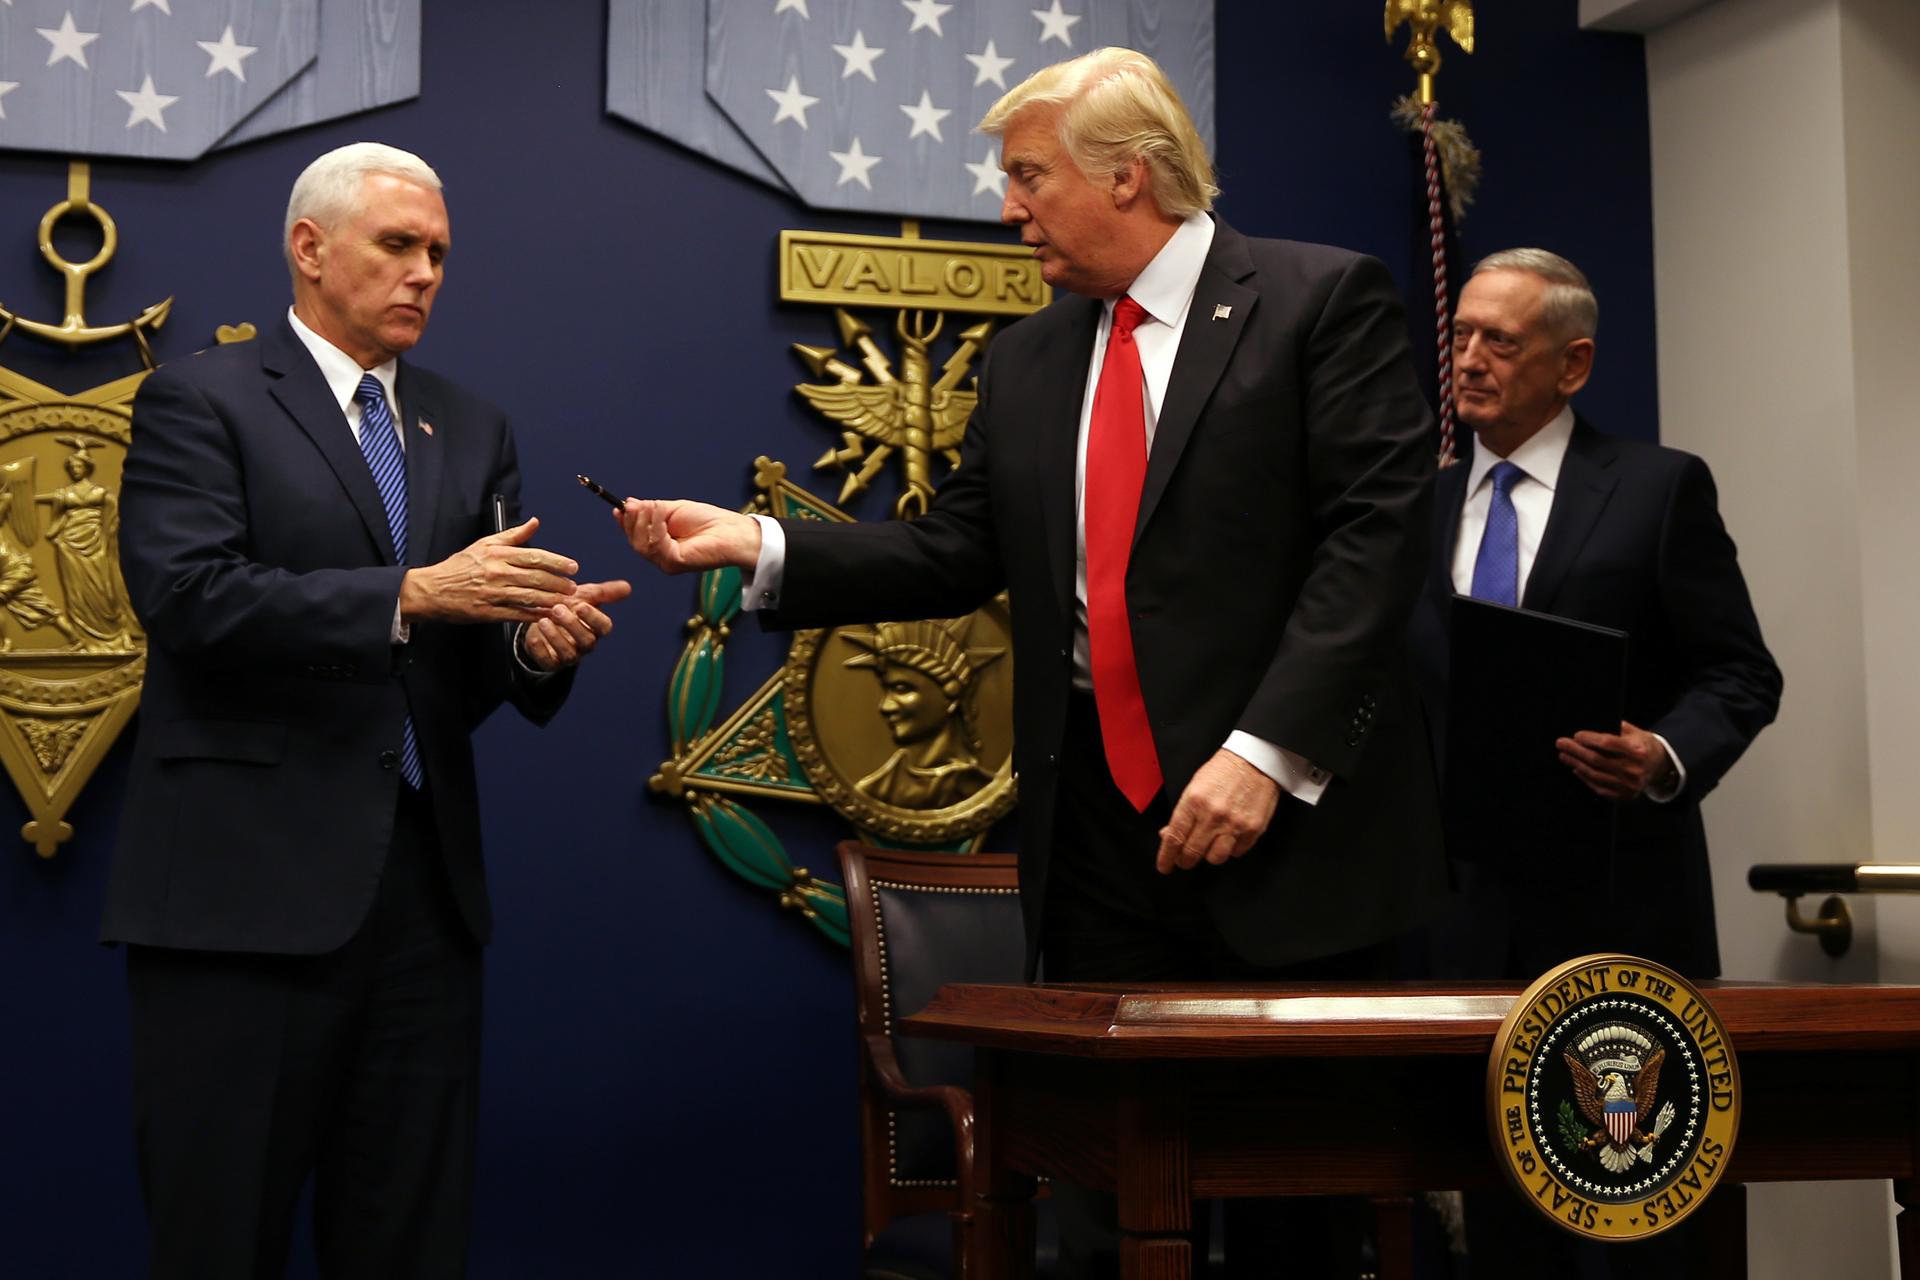 US President Donald Trump reacts after signing an executive order to impose tighter vetting of travelers entering the United States, at the Pentagon in Washington, January 27, 2017.